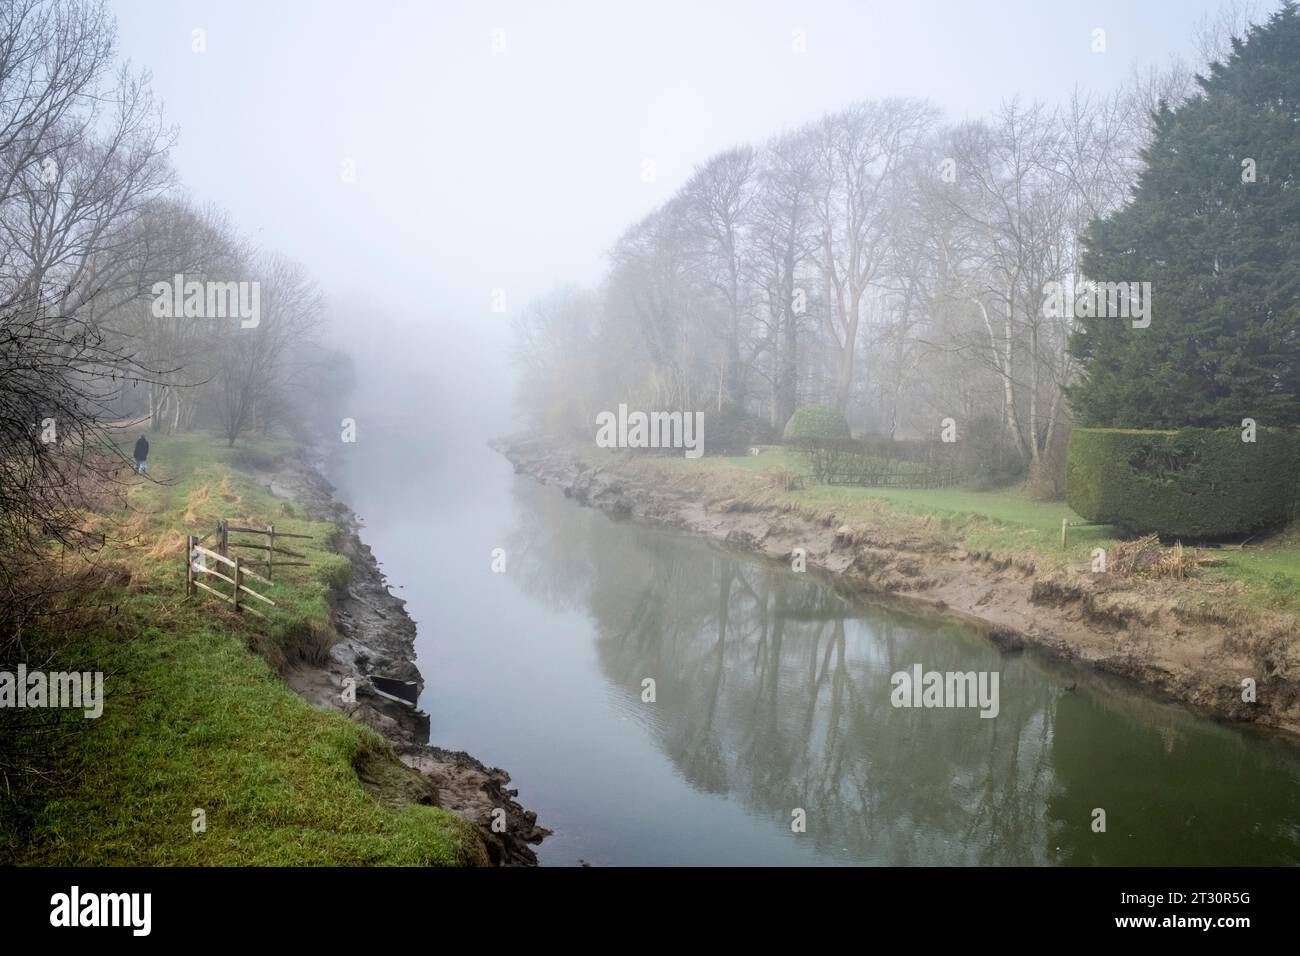 The River Ouse On A Misty Day, Lewes, East Sussex, UK. Stock Photo